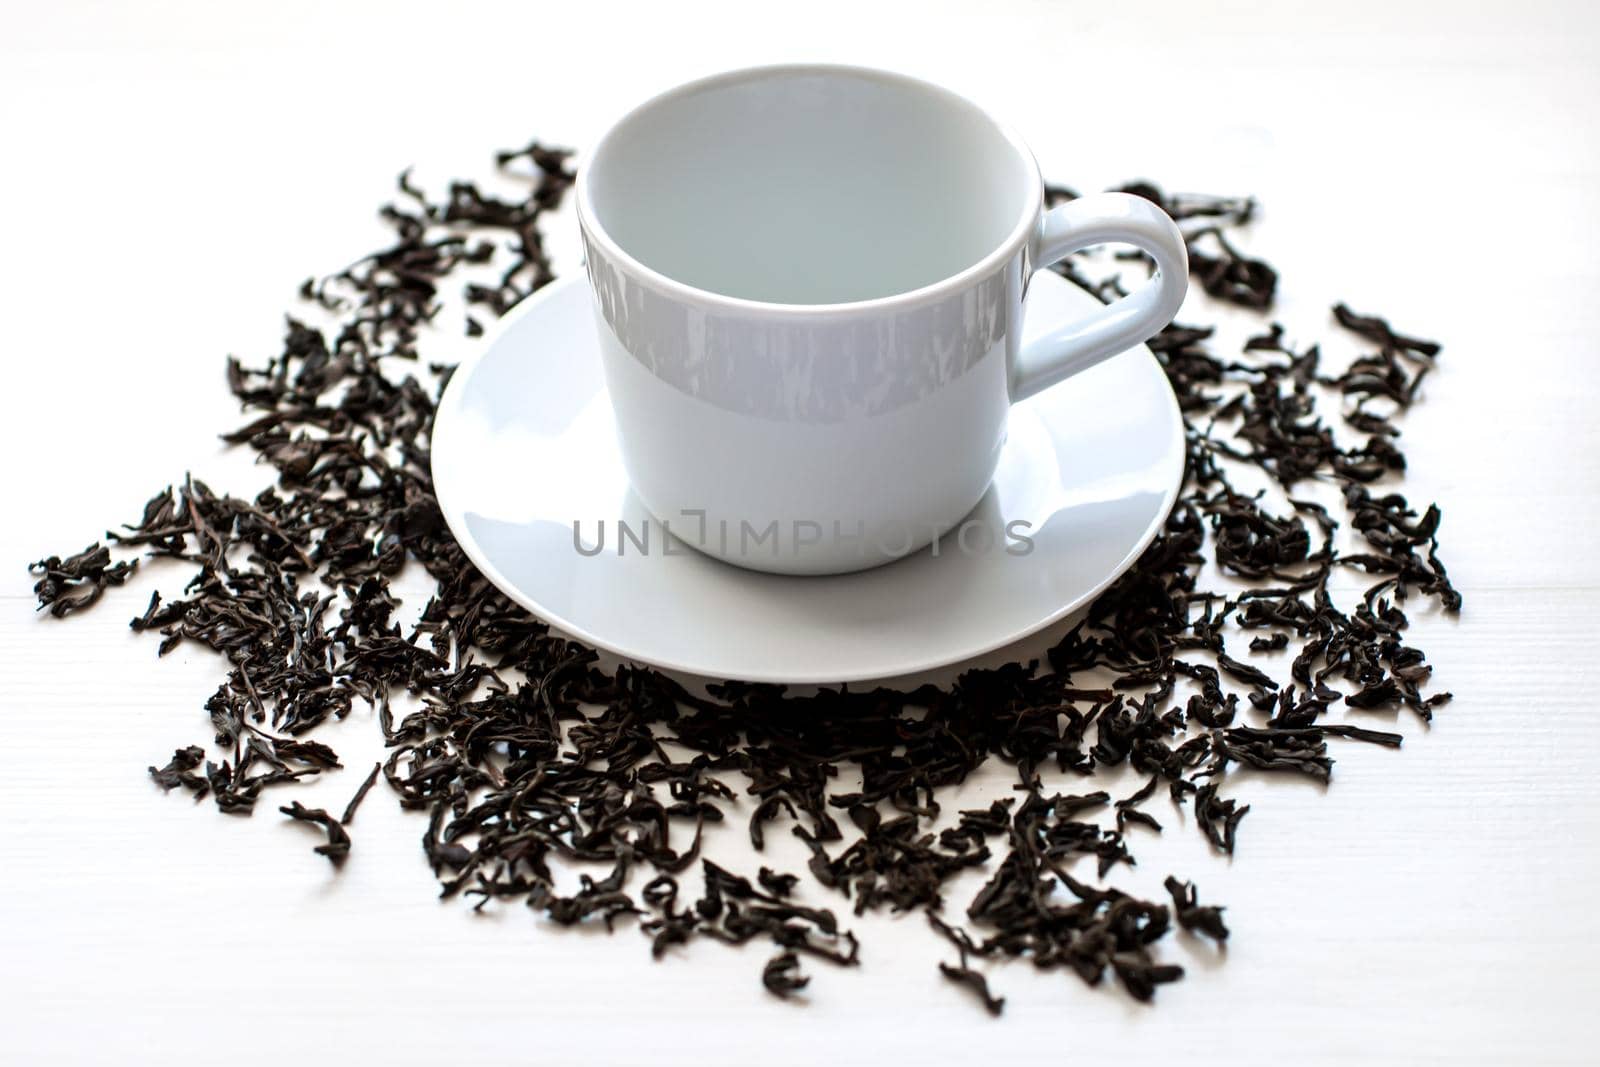 A ceramic cup and saucer with tea leaves scattered around on a white wooden table by bySergPo